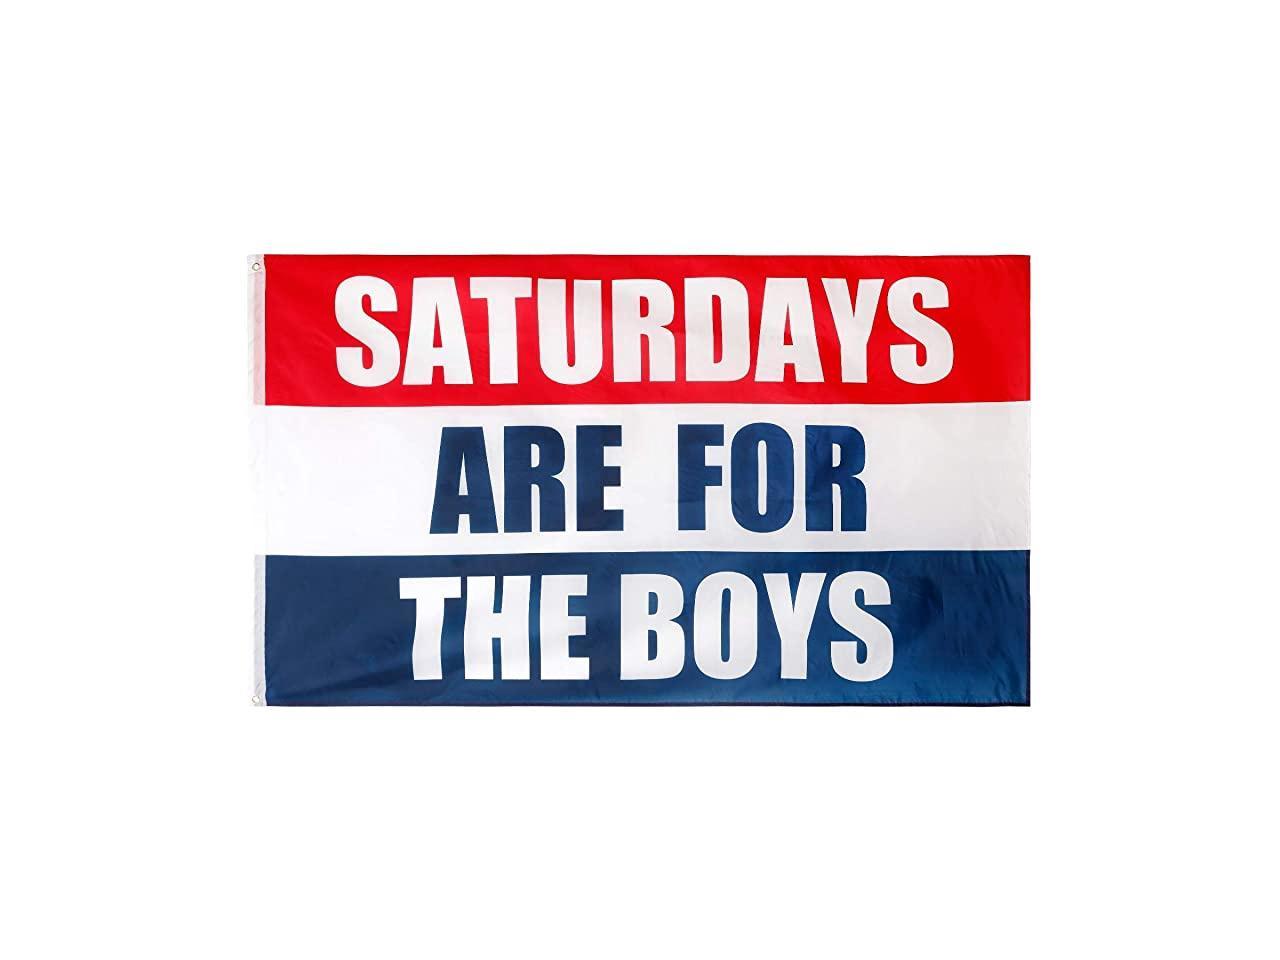 Polyester Cloth UV Resistant No Fading for College Fraternities Parties Indoor and Outdoor SAFTB 3x5 Feet for Dorm Room Decor Banner THELIB Saturdays are for The Boys Flag 